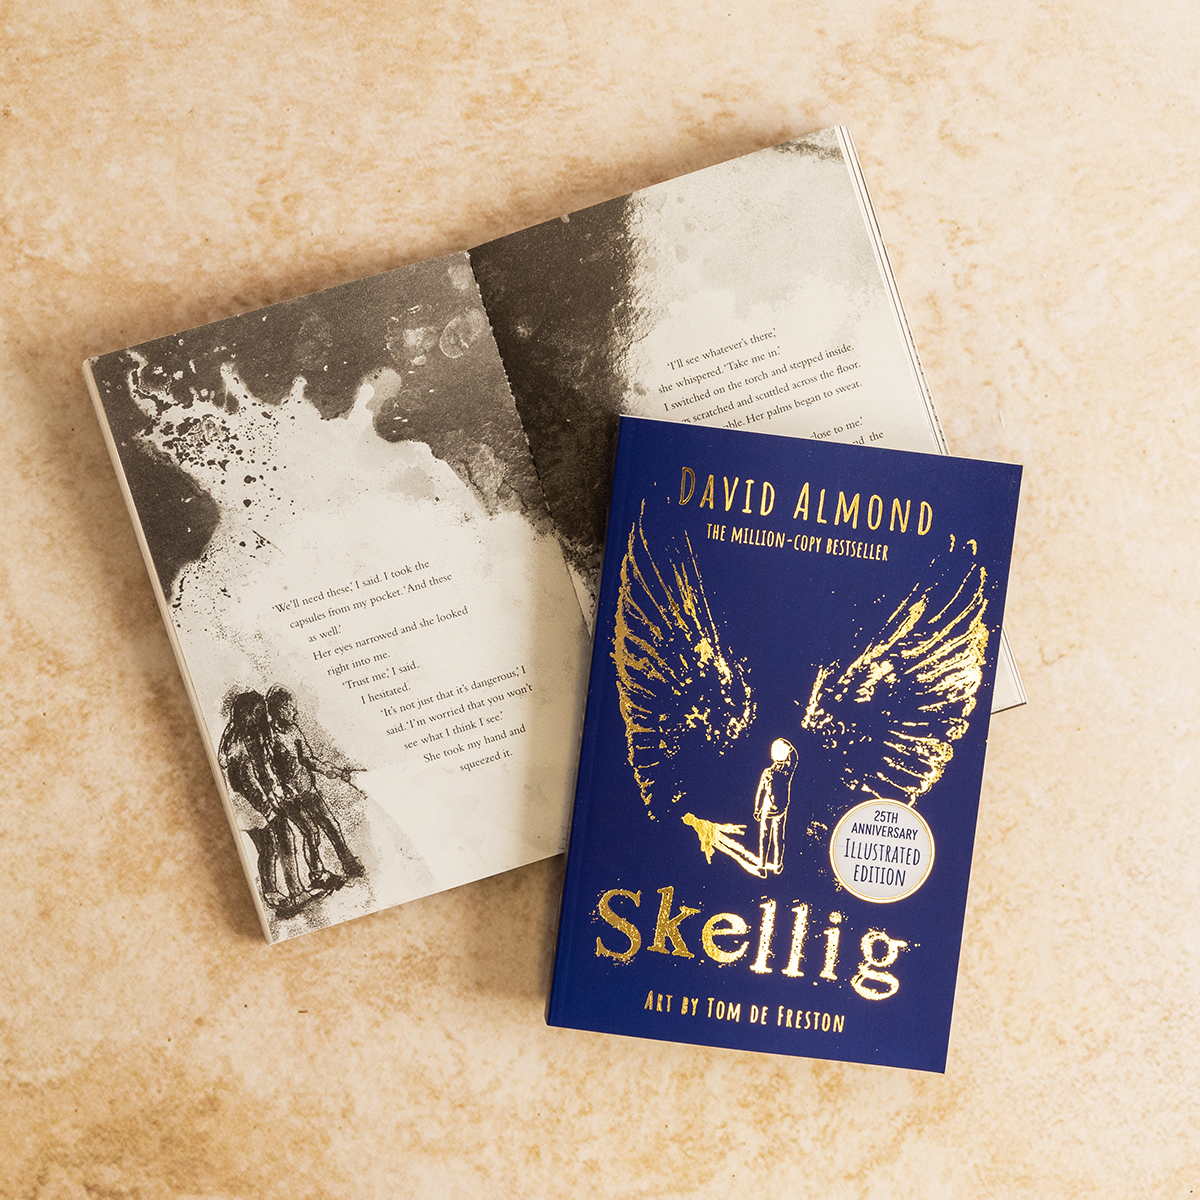 This beautifully illustrated edition of Skellig by @DavidJAlmond is now out in paperback! Discover downloadable classroom resources and posters for David's books here: brnw.ch/21wHSey